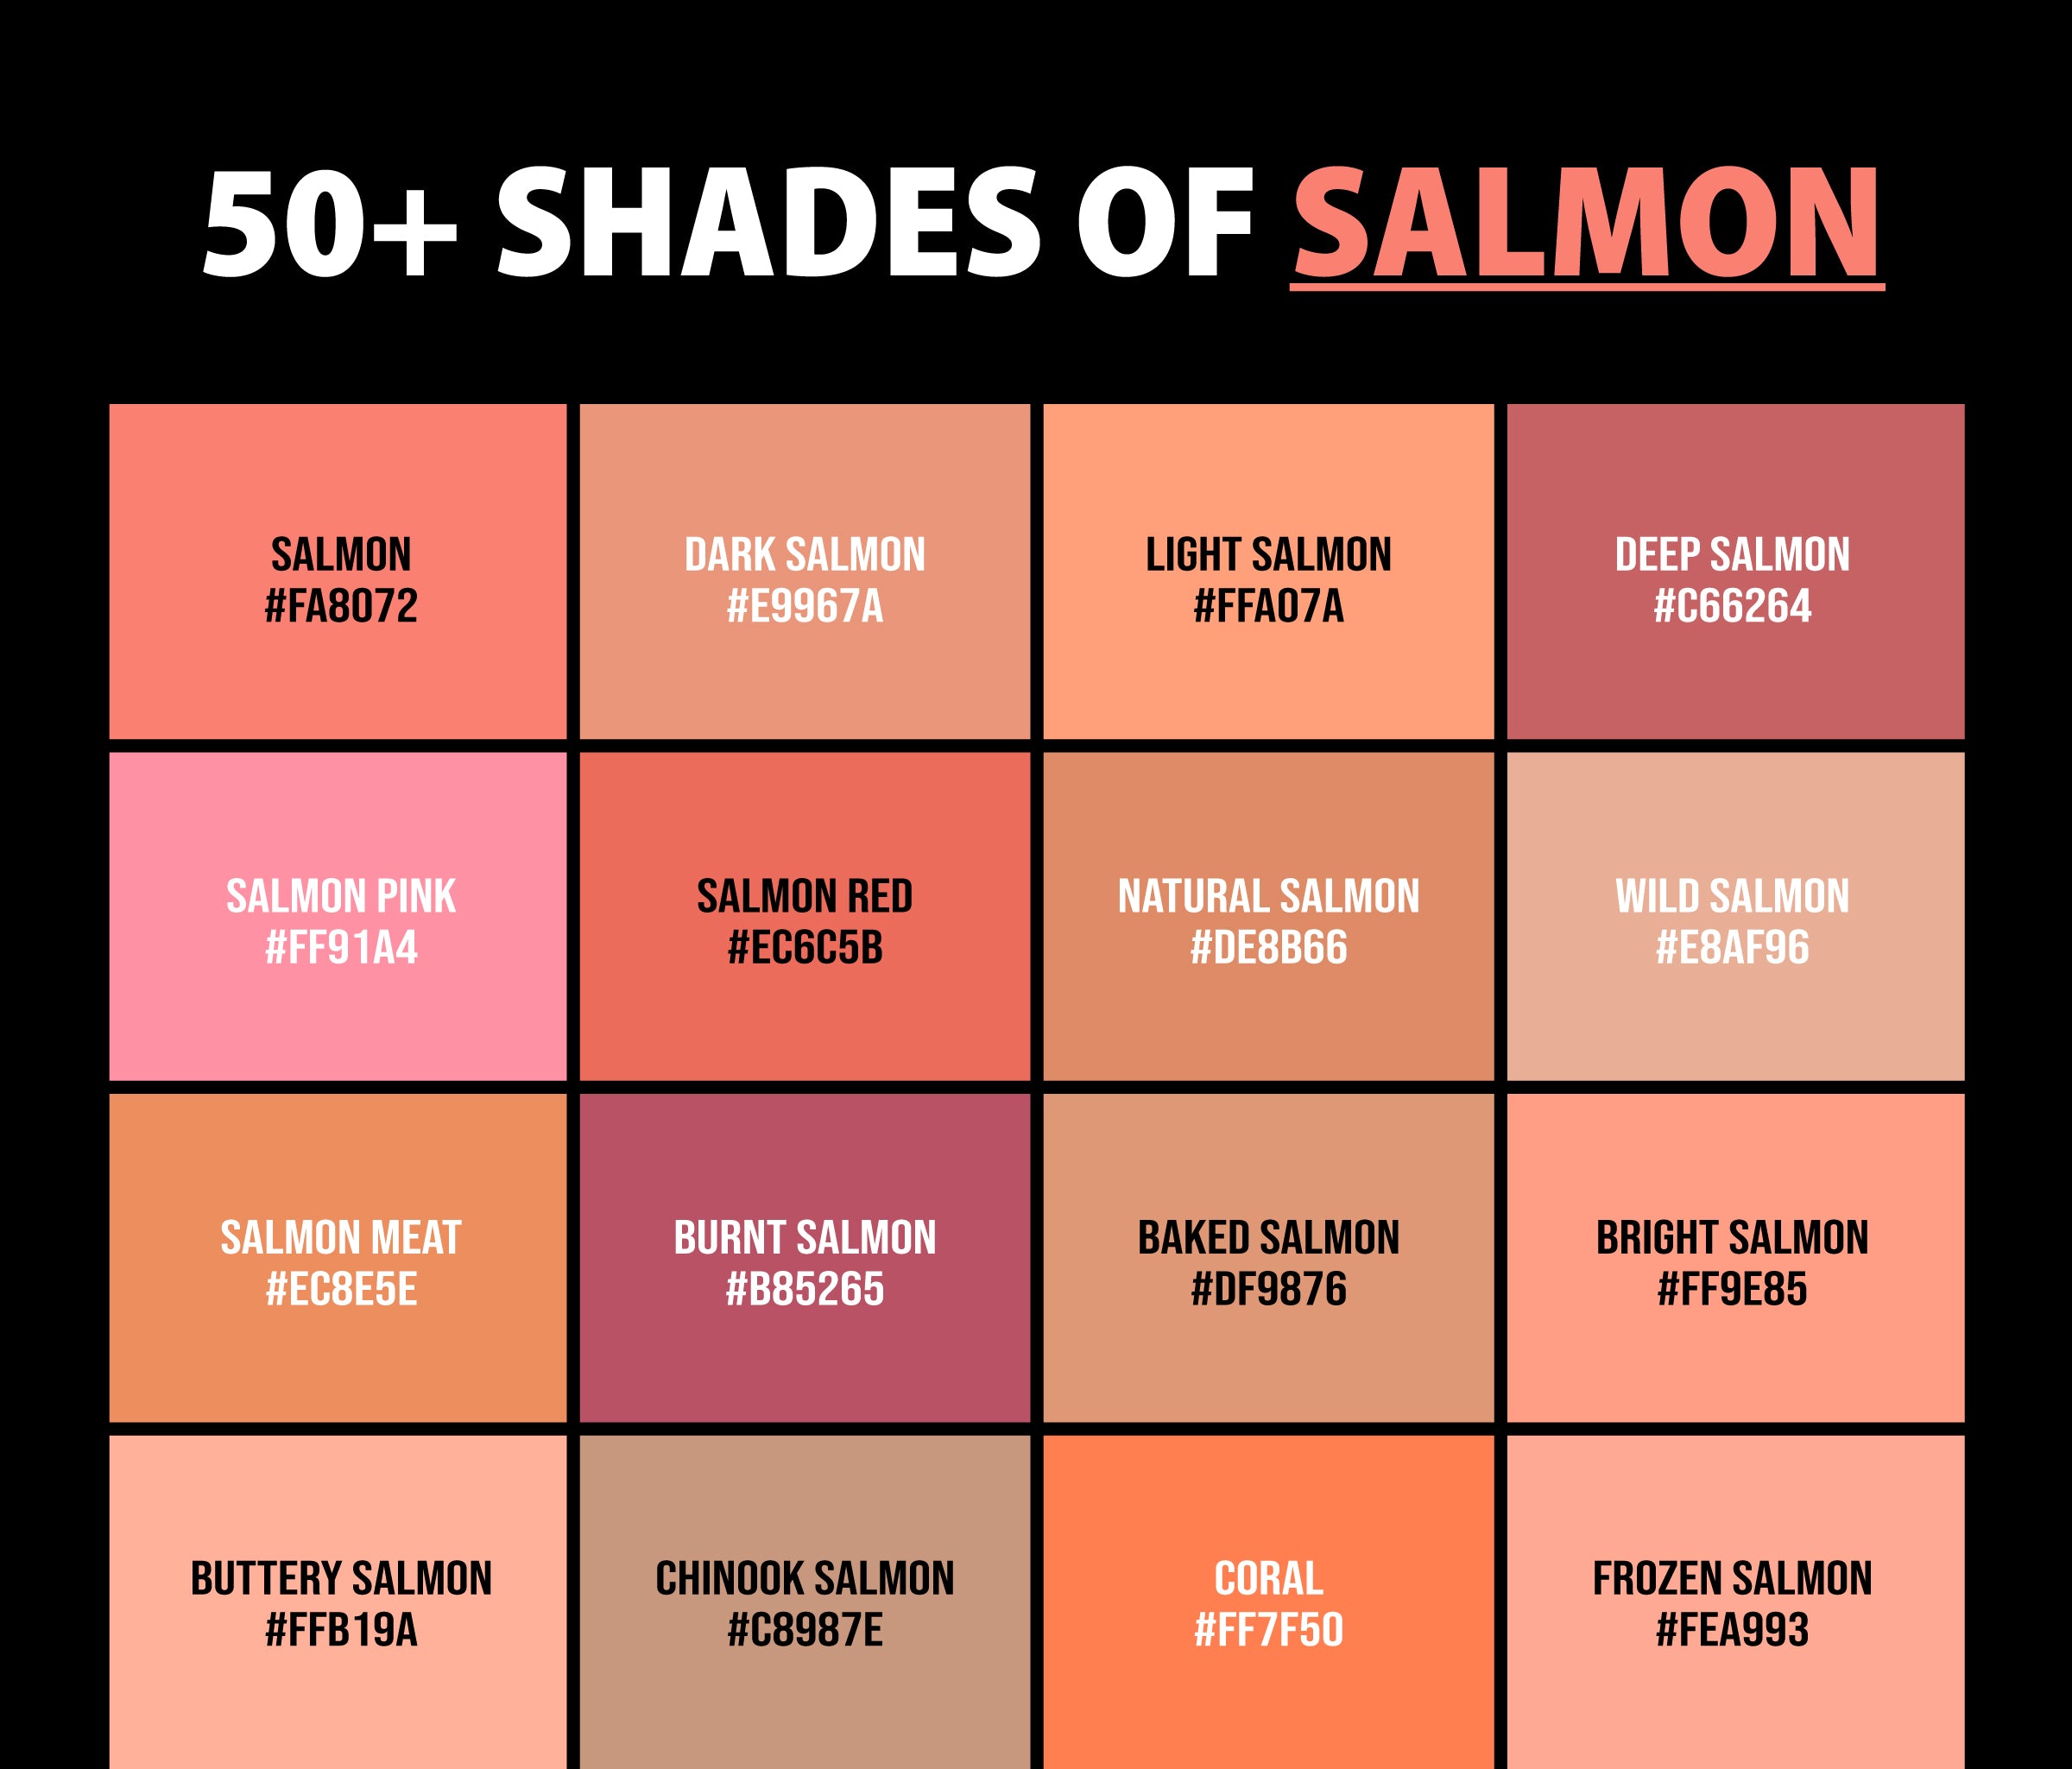 Salmon Pink Color Codes - The Hex, RGB and CMYK Values That You Need